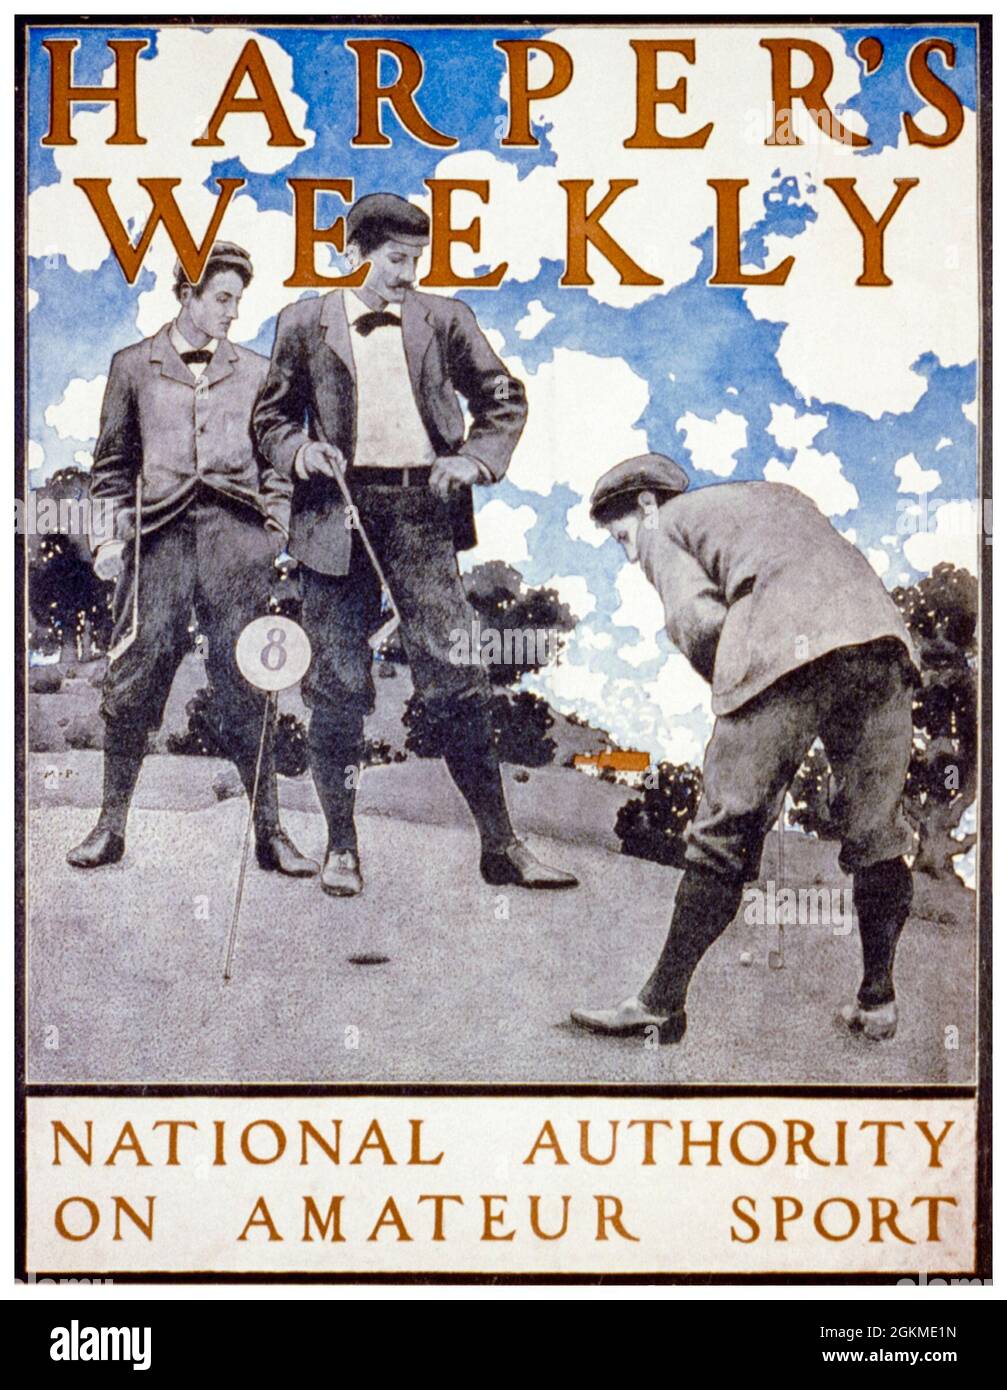 Maxfield Parrish, Harper's Weekly, National authority on amateur sport, (golf), poster, 1890-1899 Stock Photo